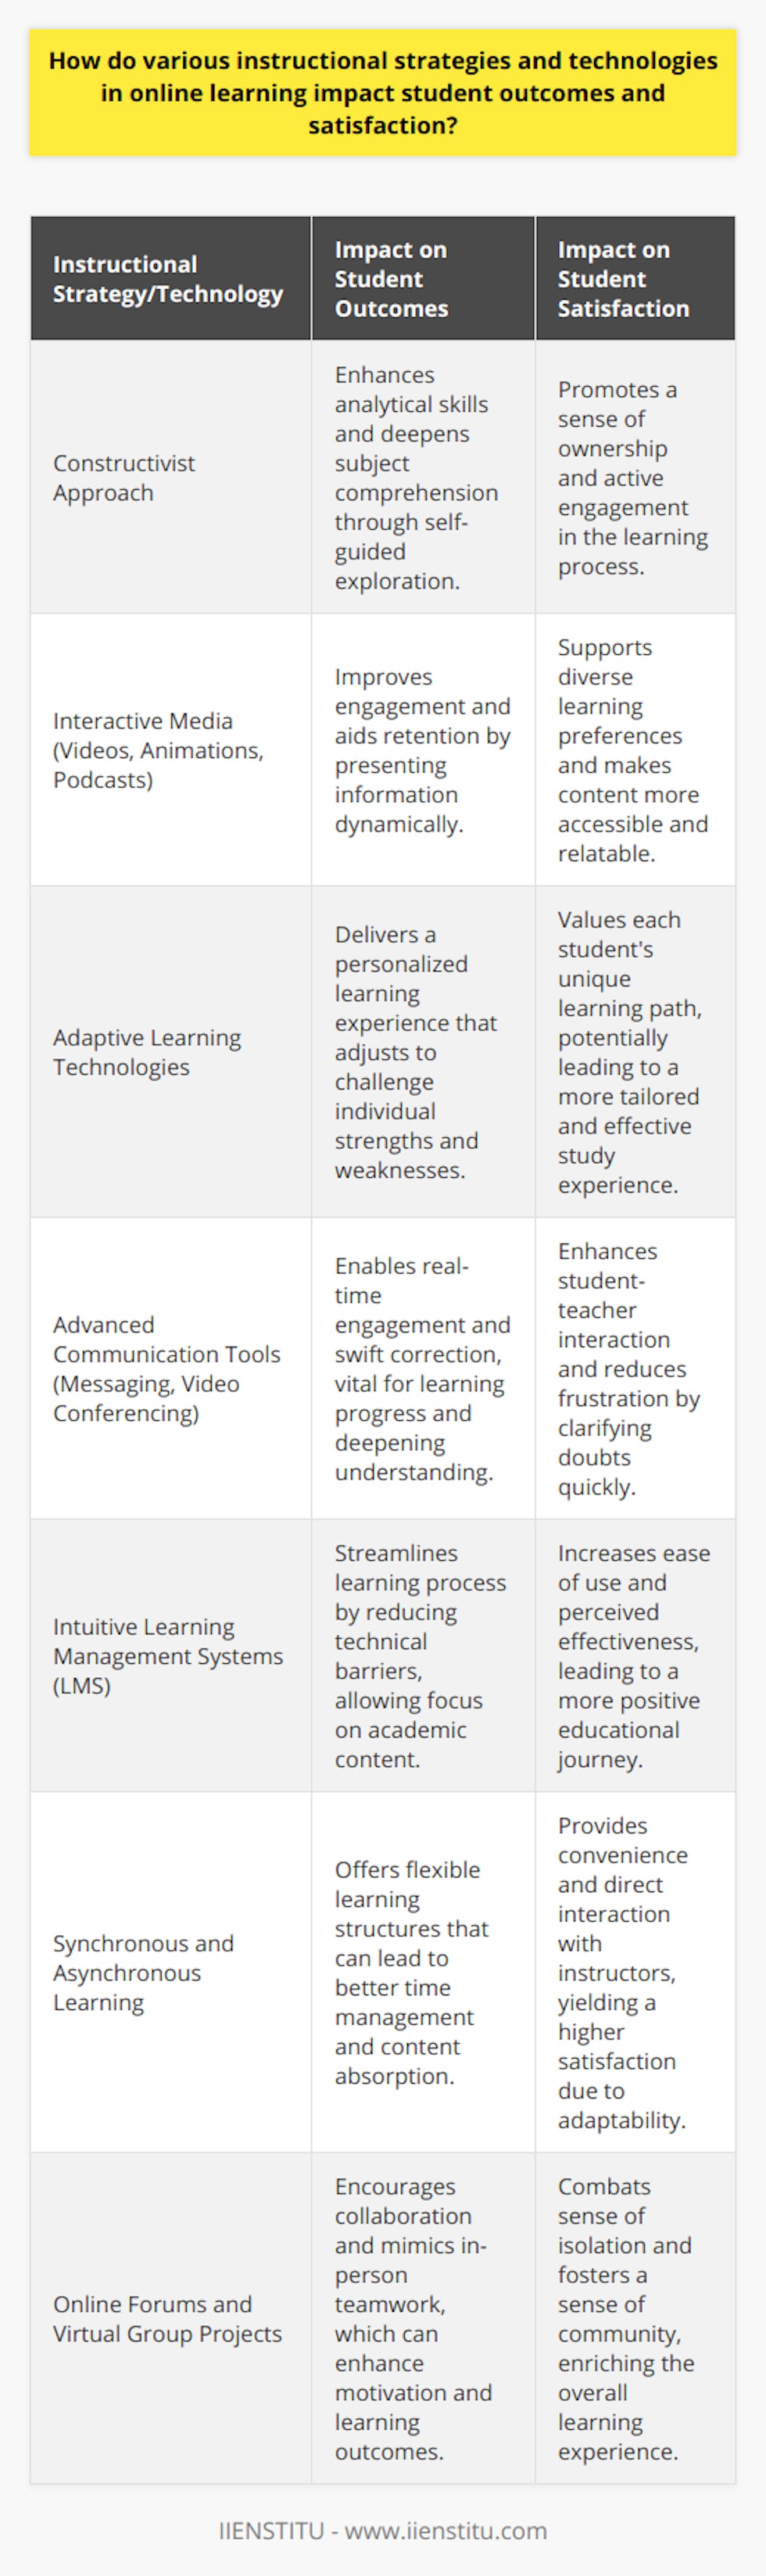 Online learning environments hinge on the effective use of instructional strategies and technologies. The nature of these tools and methods has a substantial influence on learning outcomes and the satisfaction levels of students engaging in remote education. By using a constructivist approach, online learning platforms can anchor student development in self-guided exploration and active knowledge building. This educational philosophy regards learners as creators of their understanding, allowing them to integrate new information with pre-existing knowledge, which can elevate their analytical capabilities and encourage a more profound comprehension of the subject matter.Interactive media such as videos, animations, and podcasts offer dynamic ways to present information, maintaining student engagement and aiding in the retention of course material. Visual representations can demystify complex ideas, while auditory components can cater to different learning styles. This multimodal approach not only grounds abstract concepts in more relatable contexts but also supports diverse learning preferences, making content accessible to a broader audience.The implementation of adaptive learning technologies has been another milestone in the evolution of online instruction. These systems intuitively tailor the content and pace of learning to align with an individual's performance and knowledge level. By providing a customized learning trajectory, these technologies are central to delivering differentiated instruction across digital platforms. Consequently, students can often achieve better outcomes since the material adjusts to challenge their unique strengths and weaknesses.Furthermore, the development of advanced communication tools has reinvented the student-teacher dynamic online. Instant messaging, video conferencing, and digital feedback mechanisms allow for real-time engagement and swift correction of errors, which is essential for progress and deepening understanding. Such responsive communication channels play a vital role in clarifying doubts and improving student results.From the perspective of student satisfaction, the usability and perceived effectiveness of the chosen technologies are paramount. An intuitive Learning Management System (LMS) such as IIENSTITU can elevate the learning experience by simplifying navigation and reducing technical barriers. This streamlining allows students to concentrate on their studies without technological distractions, fostering a more positive and fulfilling educational journey.The inclusion of both synchronous (live, real-time) and asynchronous (on-demand, self-paced) learning also adds a layer of flexibility, catering to different schedules and learning habits. This blend offers the structure of traditional classroom sessions alongside the convenience of accessing materials at any time. Consequently, students report greater satisfaction as they can mold their education around personal commitments whilst still benefiting from direct interaction with instructors and peers.Social presence and peer collaboration are further enhanced through features like online forums and virtual group projects. In digital learning spaces where physical cues are absent, these features are instrumental in combating the sense of isolation. They provide avenues for discussion, debate, and teamwork that mimic in-person collaboration, thus bolstering motivation and enriching the learning experience.In summary, the thoughtful application of various instructional strategies and cutting-edge technologies in online learning environments is critical to shaping positive student outcomes and satisfaction. Through active learning approaches, personalized instruction, and fostering a sense of community, these methods and tools not only advance academic performance but also amplify the enjoyment and engagement in the learning process.